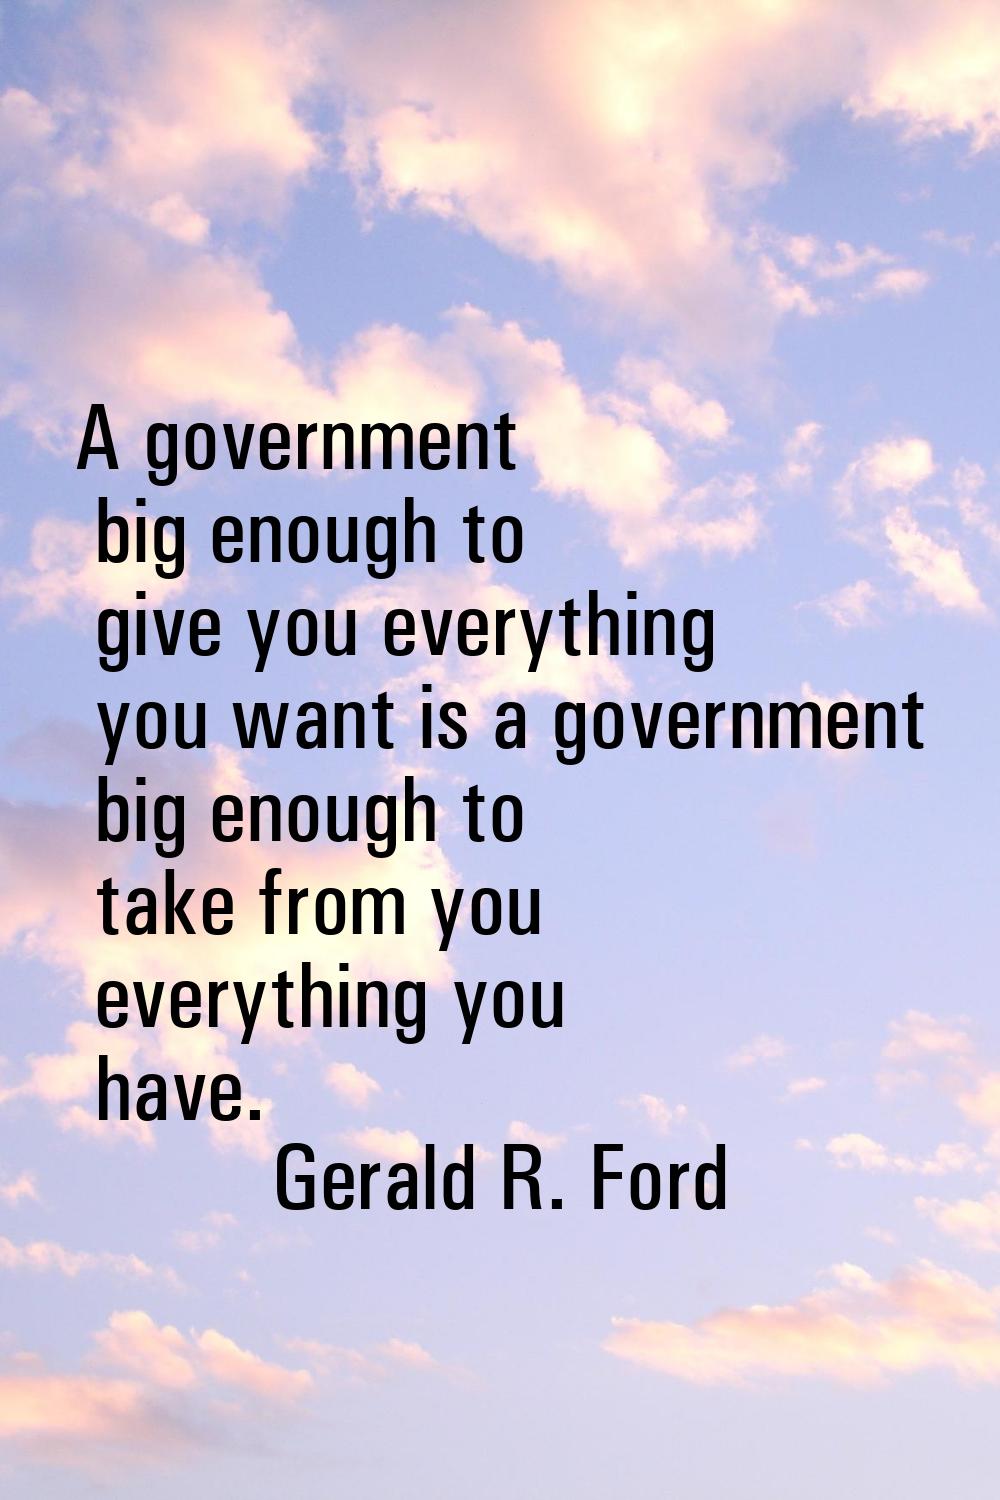 A government big enough to give you everything you want is a government big enough to take from you